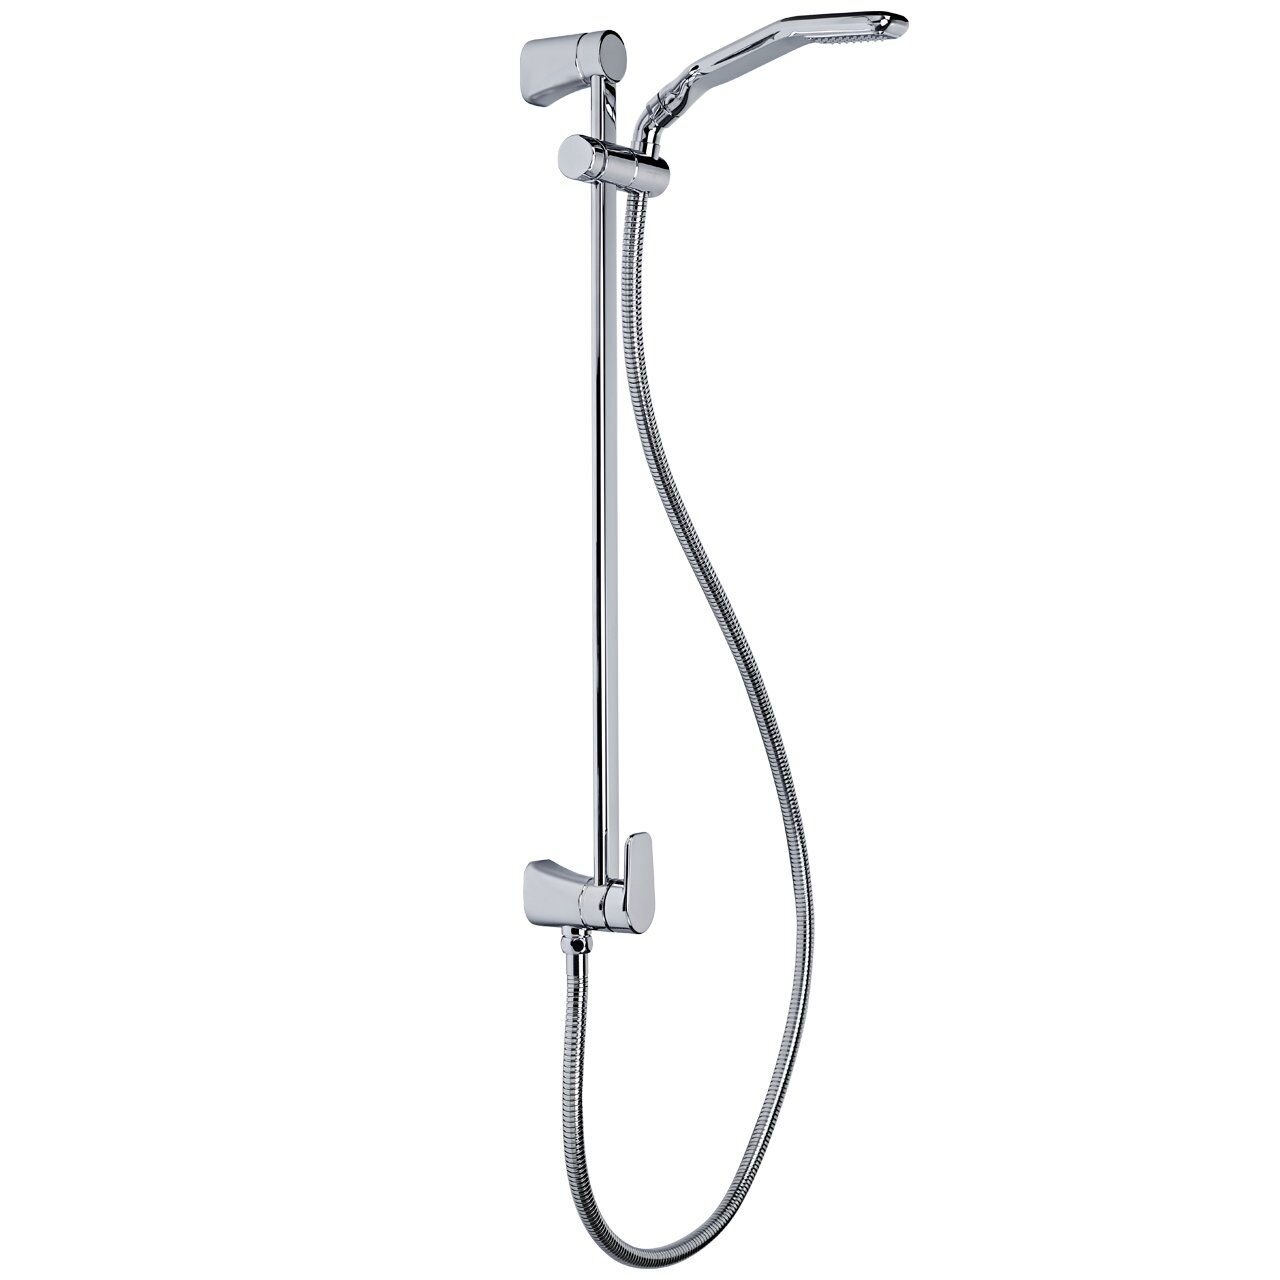 Perrin  Rowe Kitchen Minoan Sink Mixer with U Spout  Rinse 4365  Bathroom Luxe